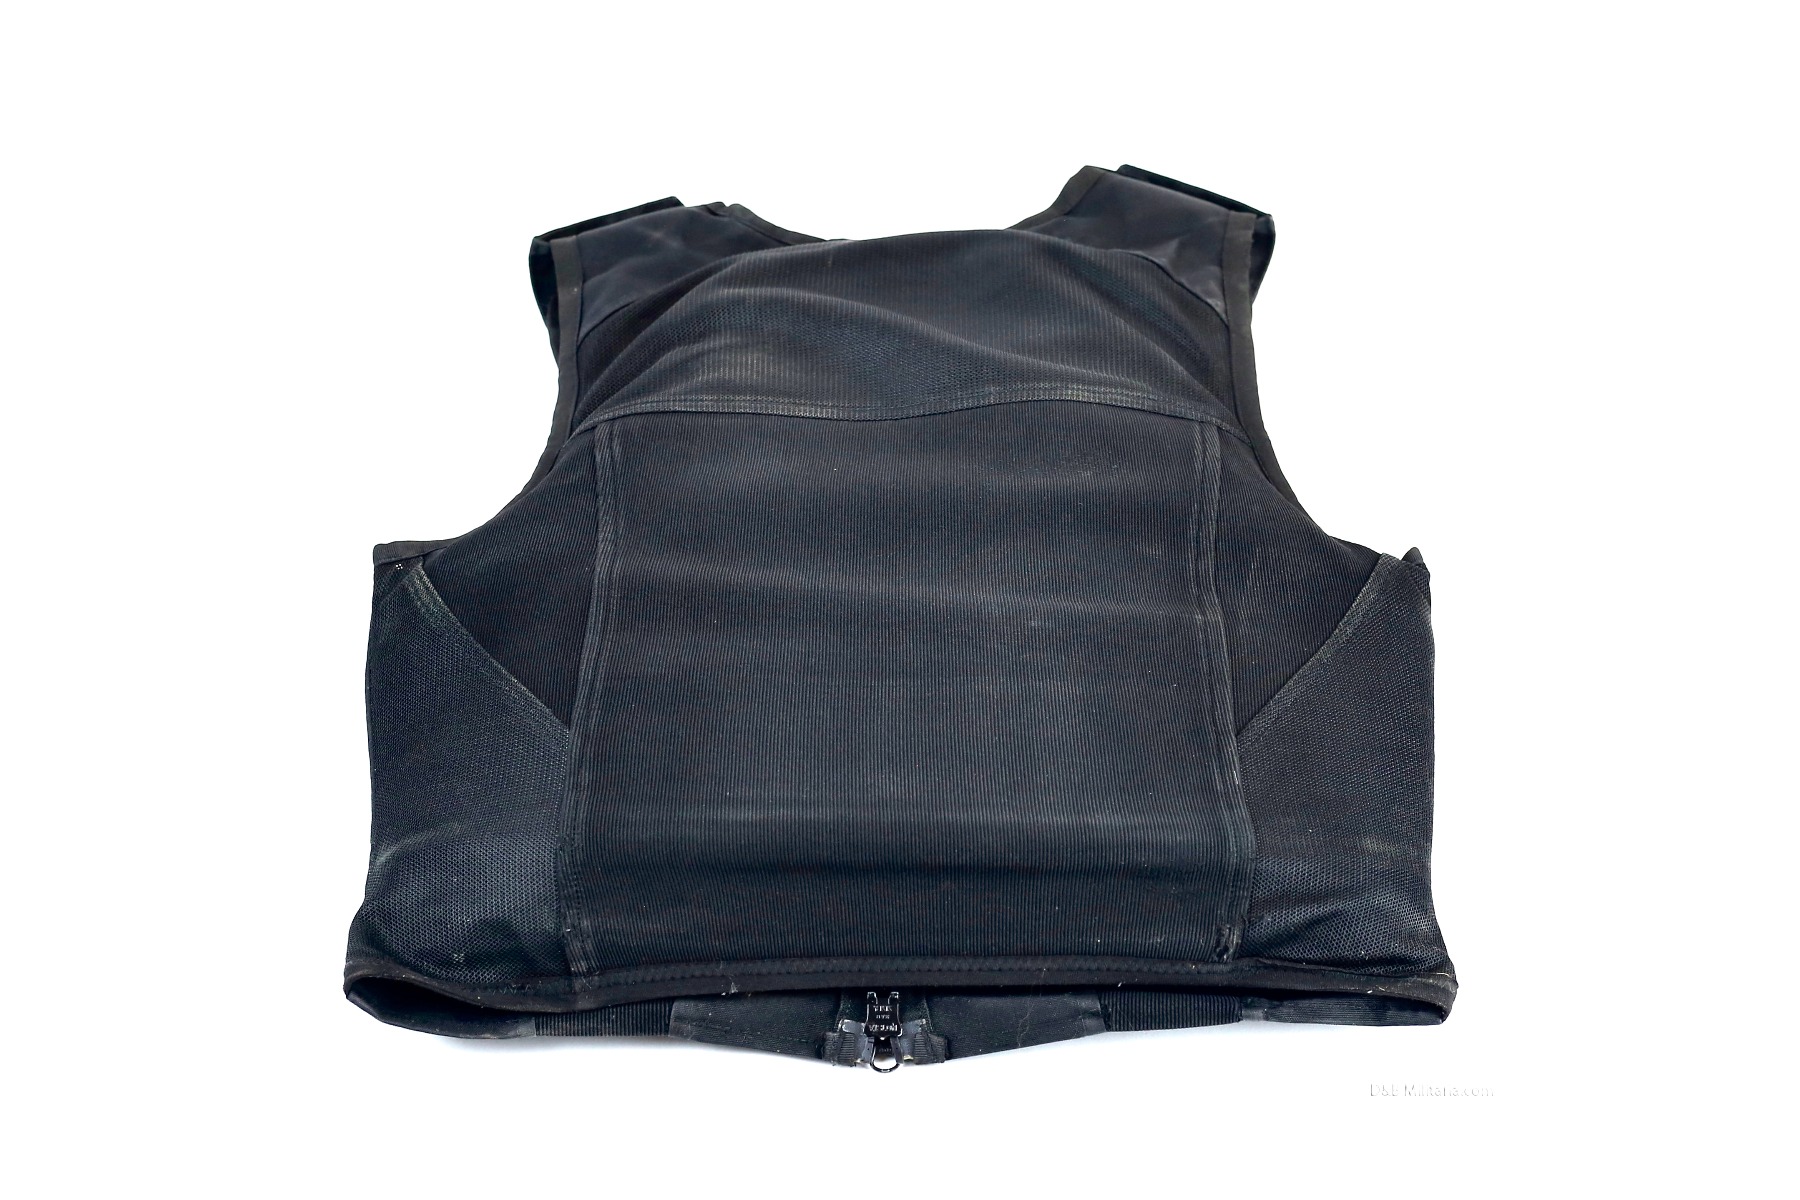 Hawk Protection Personal body armour (3) (UM) (C)